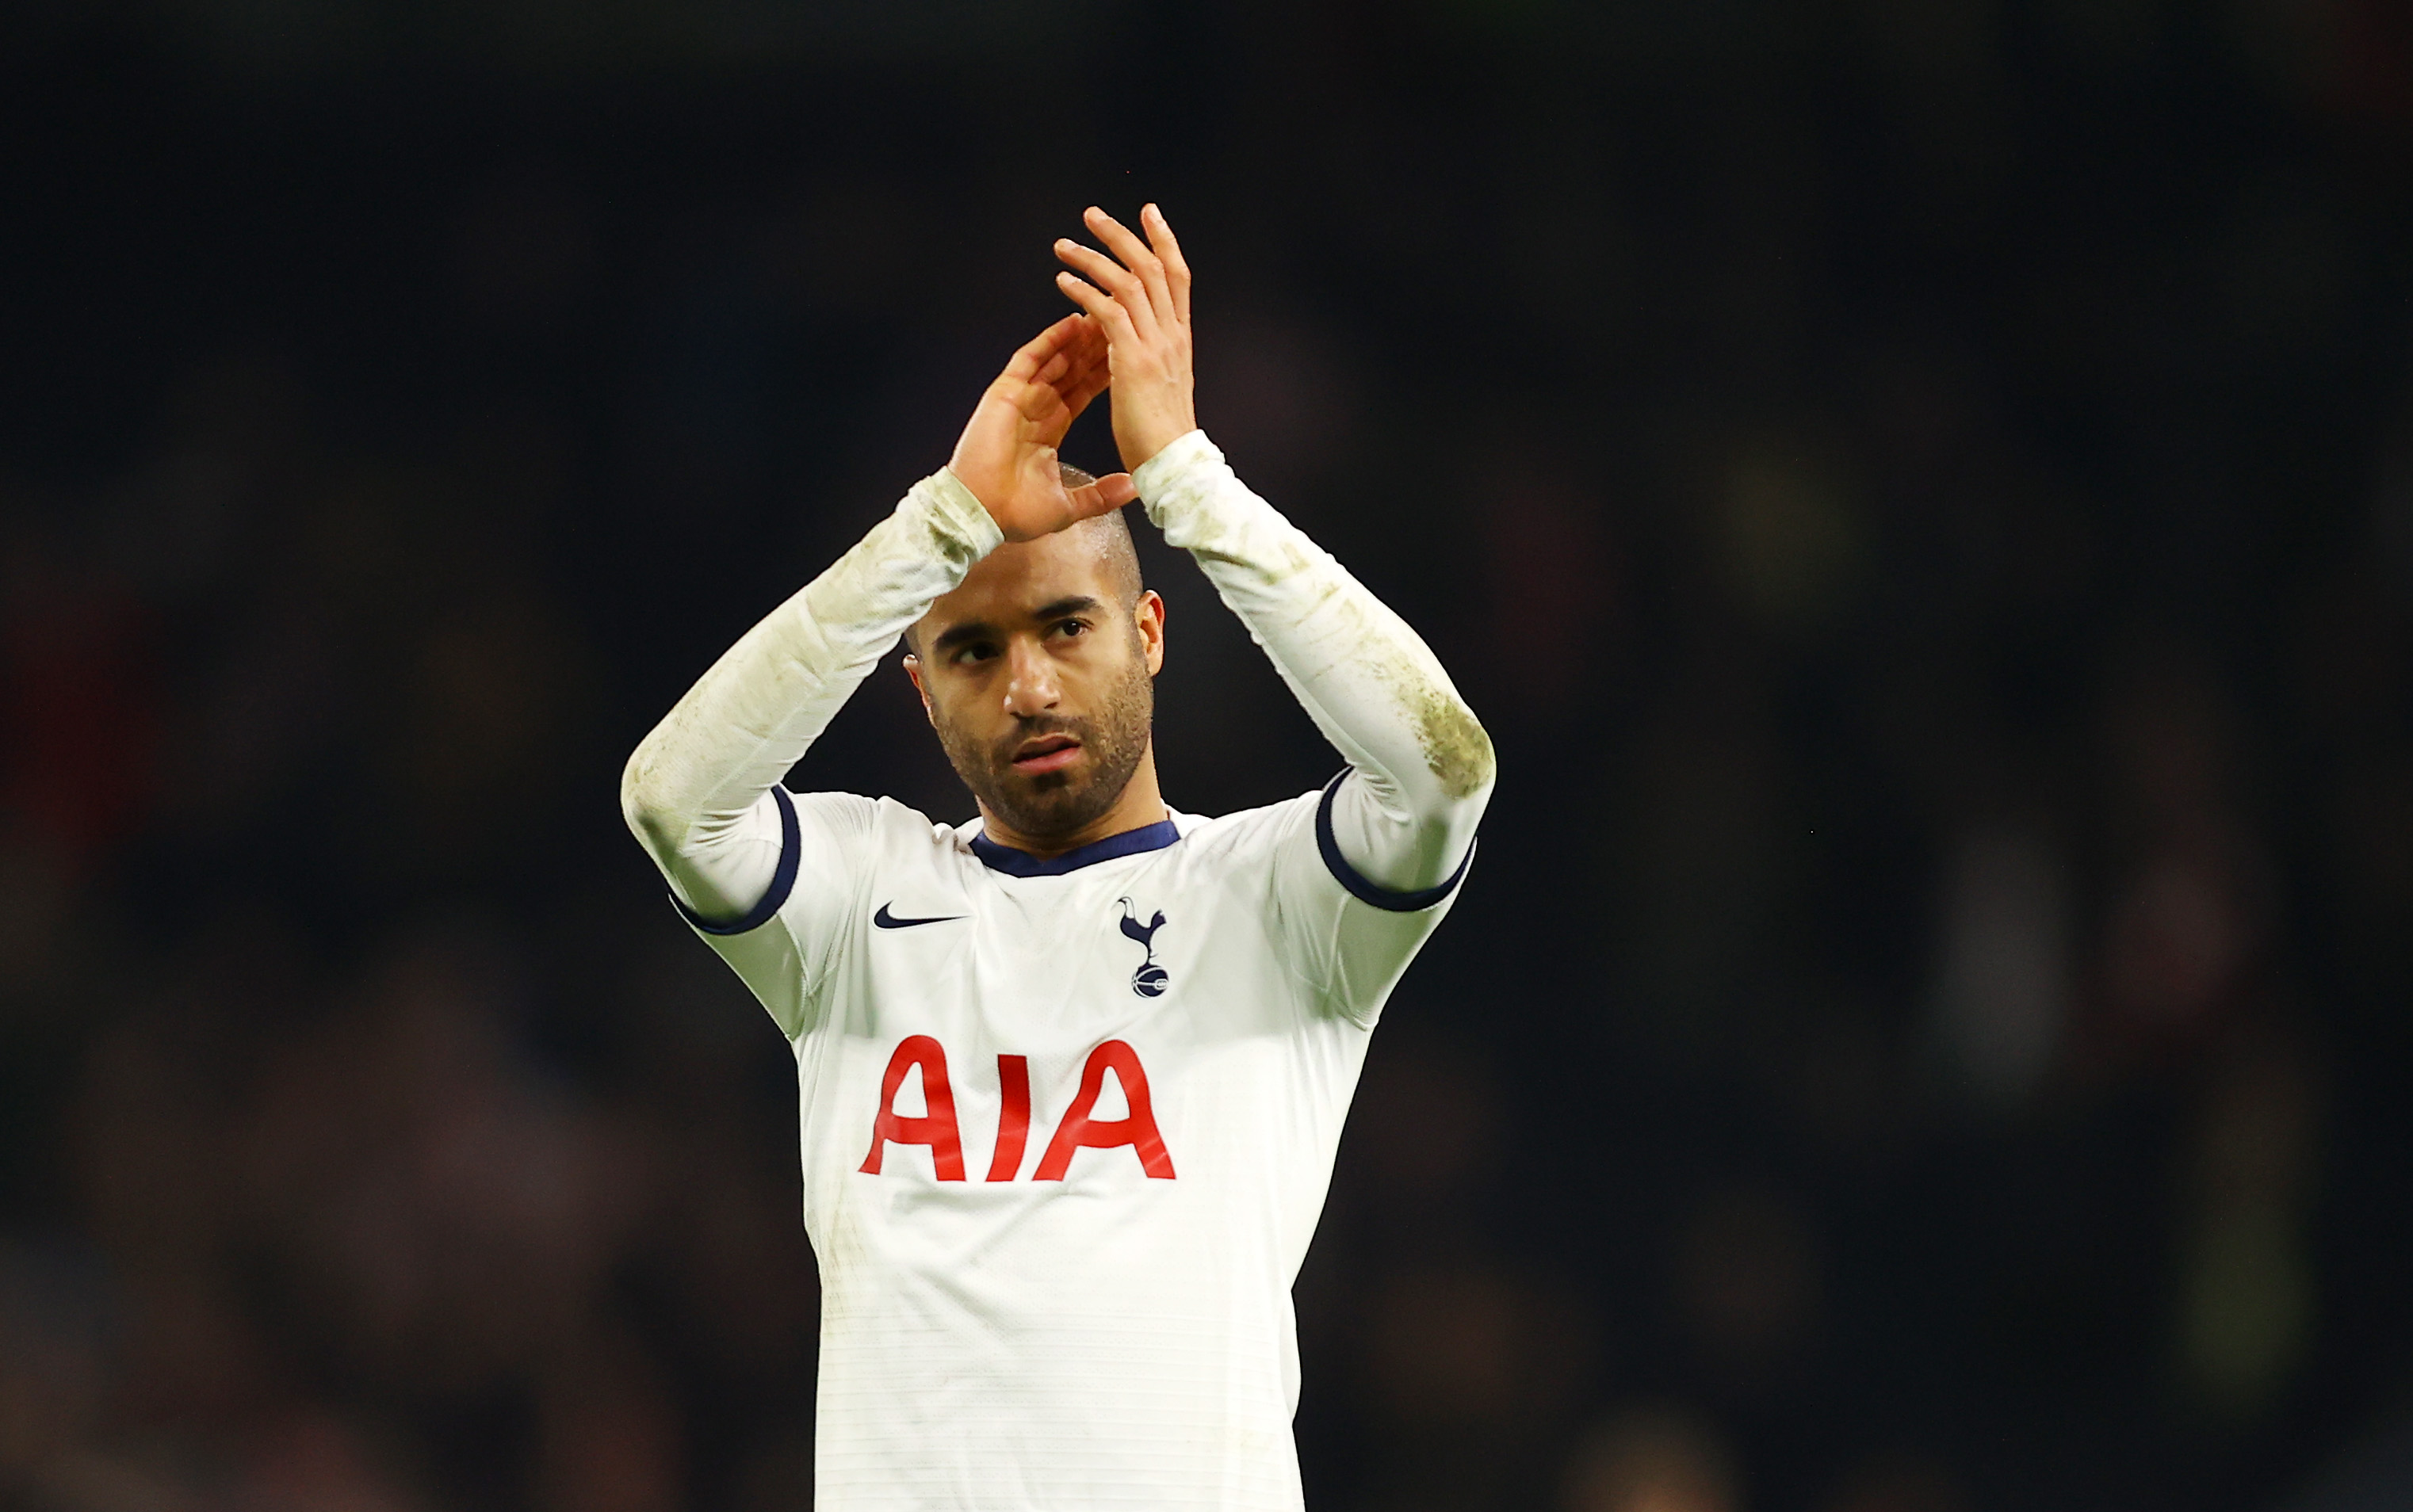 Lucas Moura is available for selection after missing the last game (Photo by Julian Finney/Getty Images)